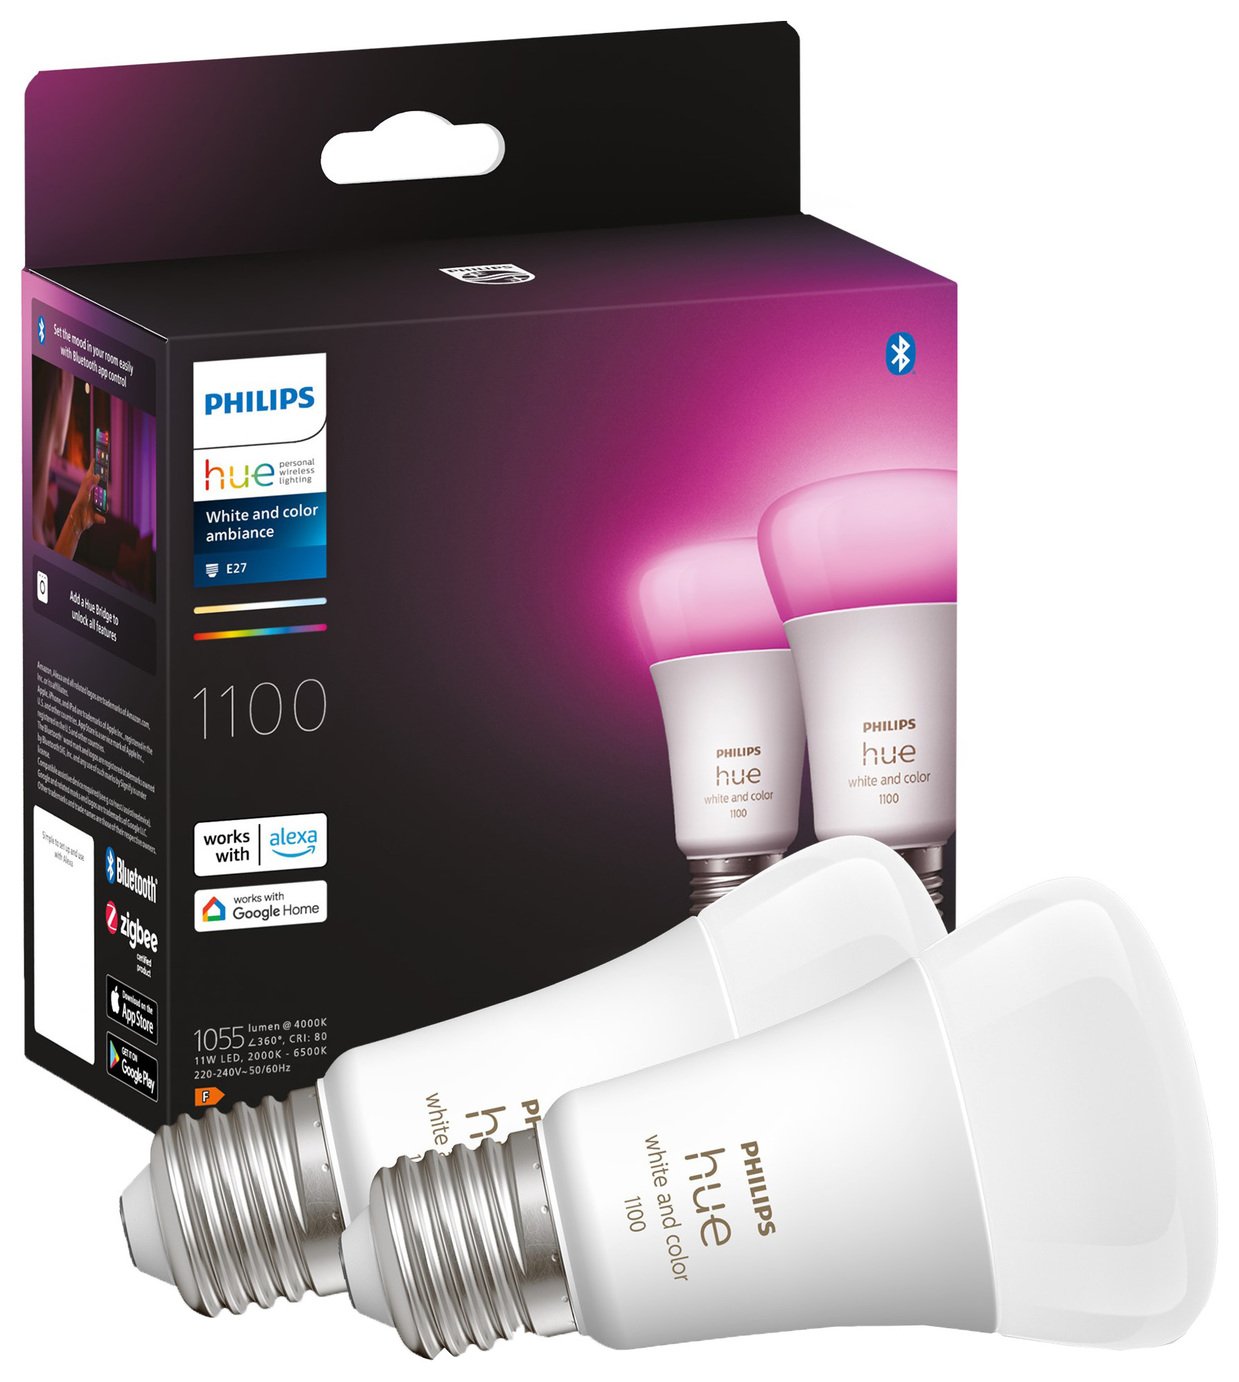 Philips Hue E27 Colour Smart Bulb With Bluetooth - 2 Pack